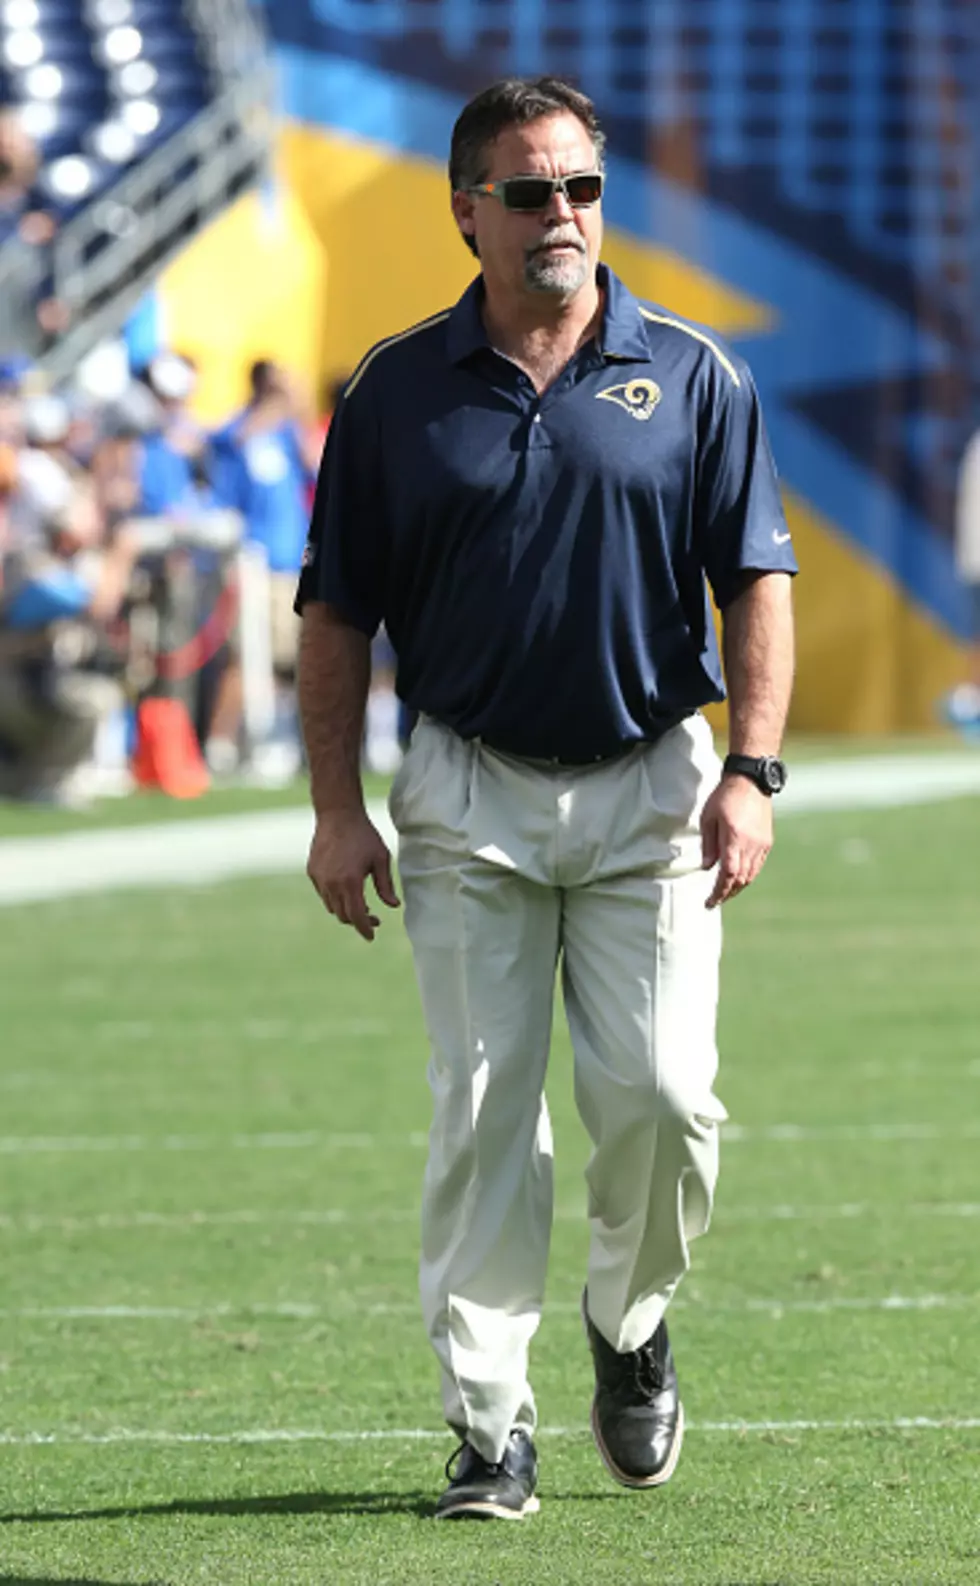 Jeff Fisher: Awesome Move or Classless Move?